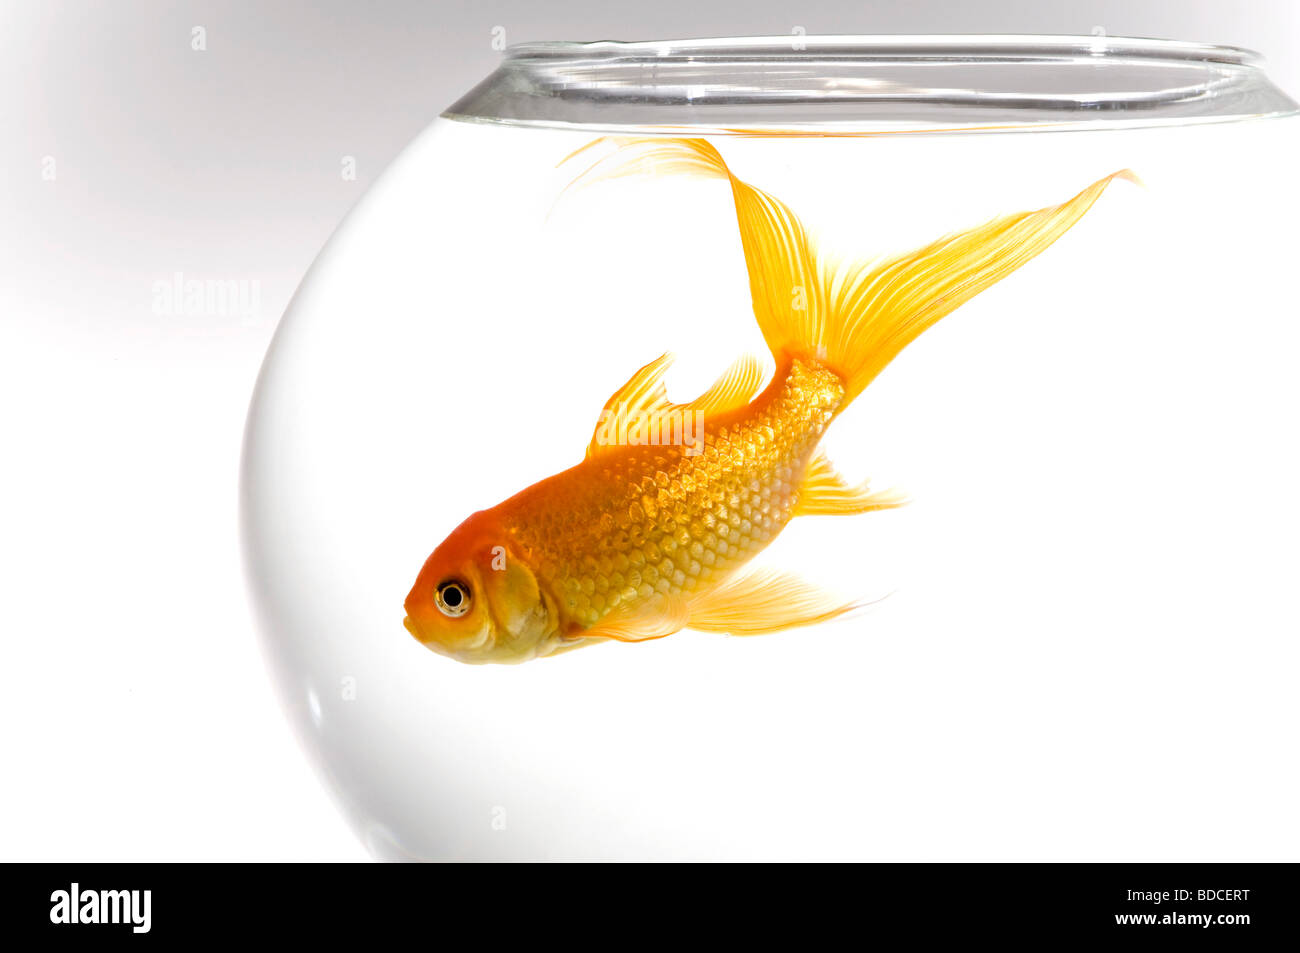 Horizontal close up of a bright orange goldfish [Carassius auratus] in a round fish bowl against a white background Stock Photo